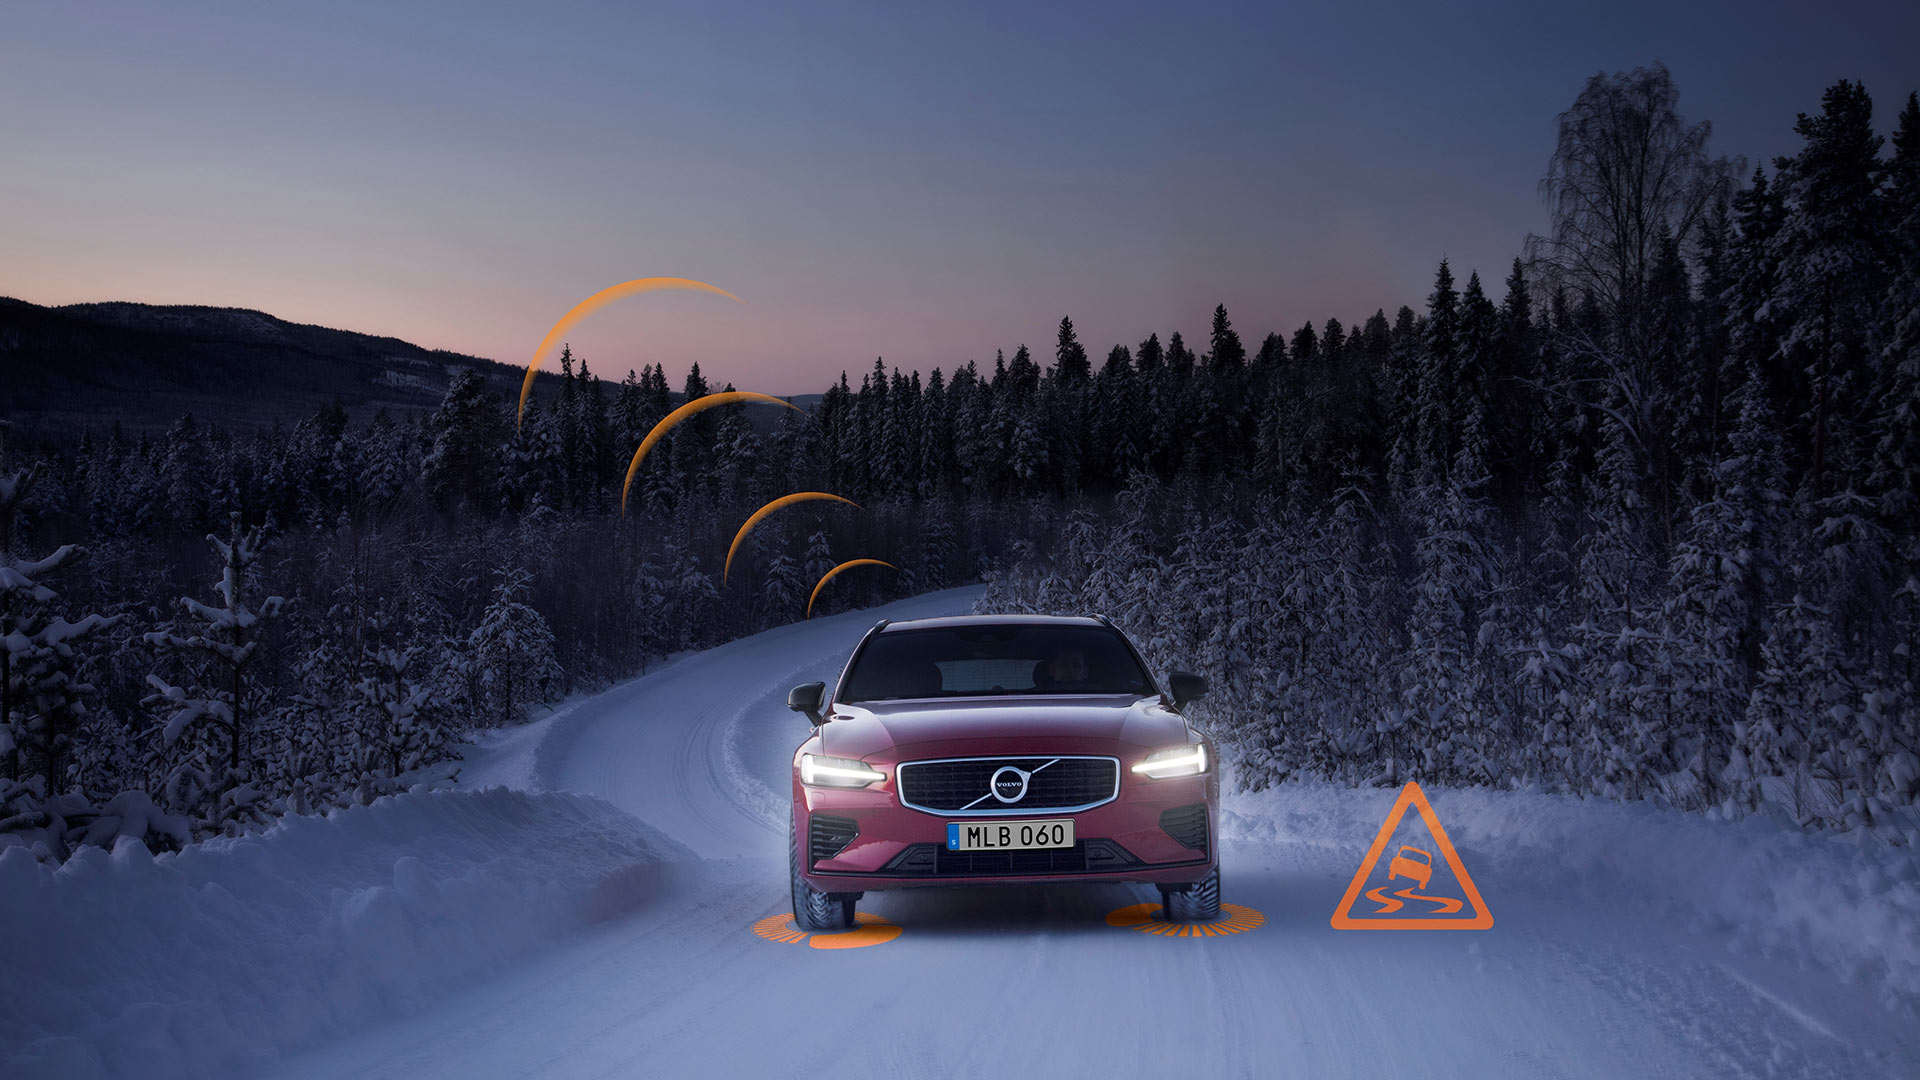 New Volvos warn each other of bad weather